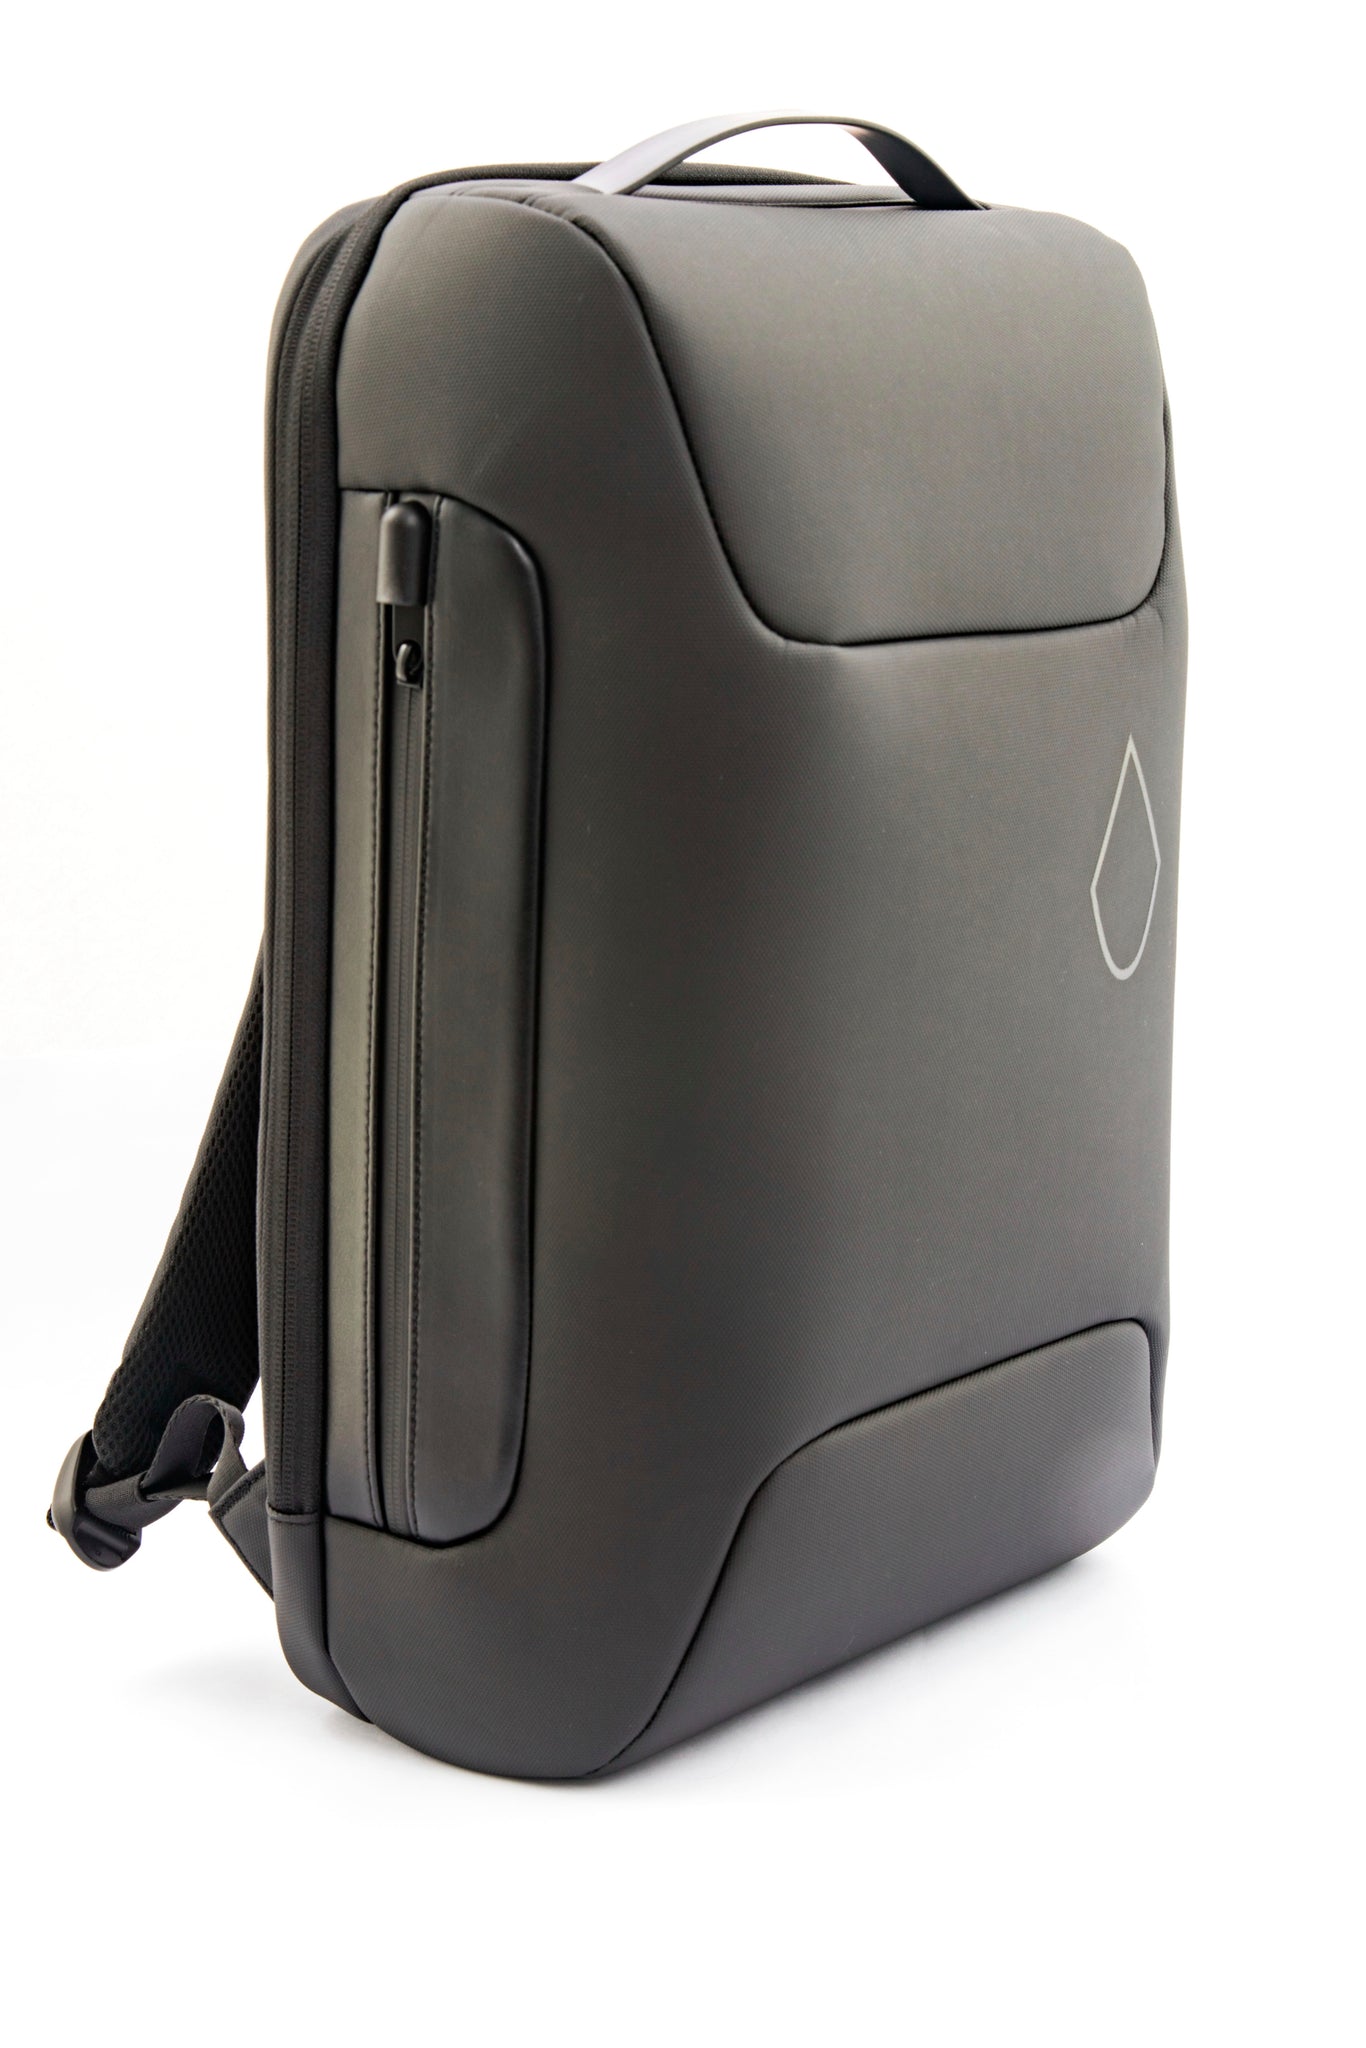 The Leitch Anti-Theft Backpack